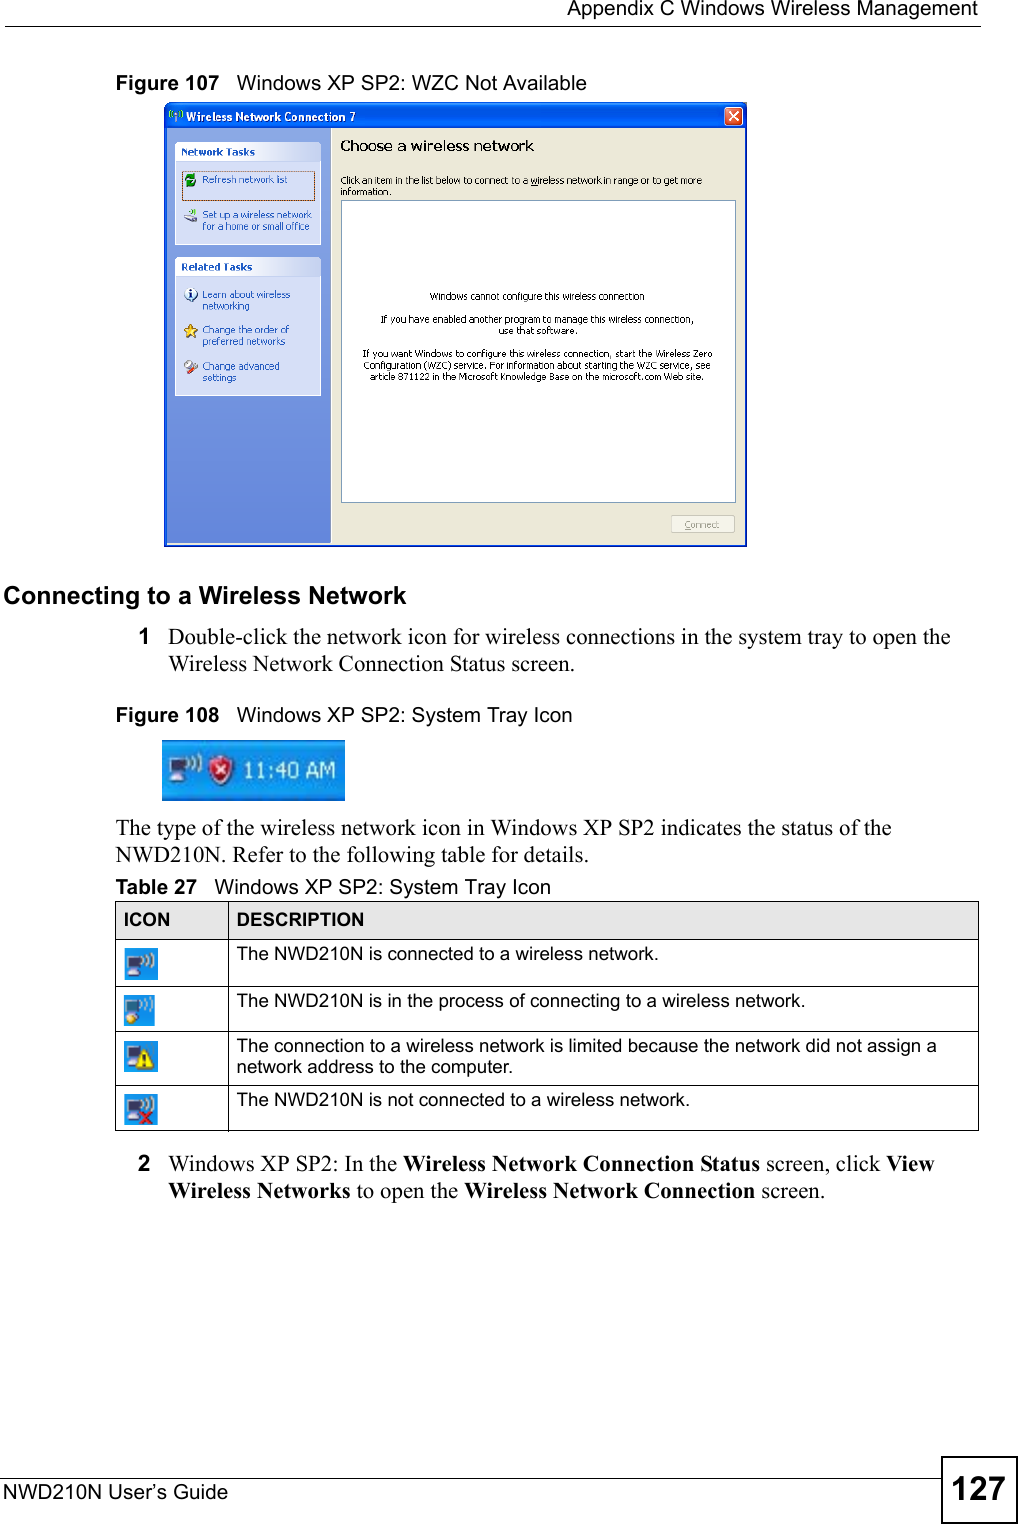  Appendix C Windows Wireless ManagementNWD210N User’s Guide 127Figure 107   Windows XP SP2: WZC Not AvailableConnecting to a Wireless Network 1Double-click the network icon for wireless connections in the system tray to open the Wireless Network Connection Status screen.Figure 108   Windows XP SP2: System Tray IconThe type of the wireless network icon in Windows XP SP2 indicates the status of the NWD210N. Refer to the following table for details.2Windows XP SP2: In the Wireless Network Connection Status screen, click View Wireless Networks to open the Wireless Network Connection screen.Table 27   Windows XP SP2: System Tray IconICON DESCRIPTIONThe NWD210N is connected to a wireless network.The NWD210N is in the process of connecting to a wireless network.The connection to a wireless network is limited because the network did not assign a network address to the computer.The NWD210N is not connected to a wireless network.